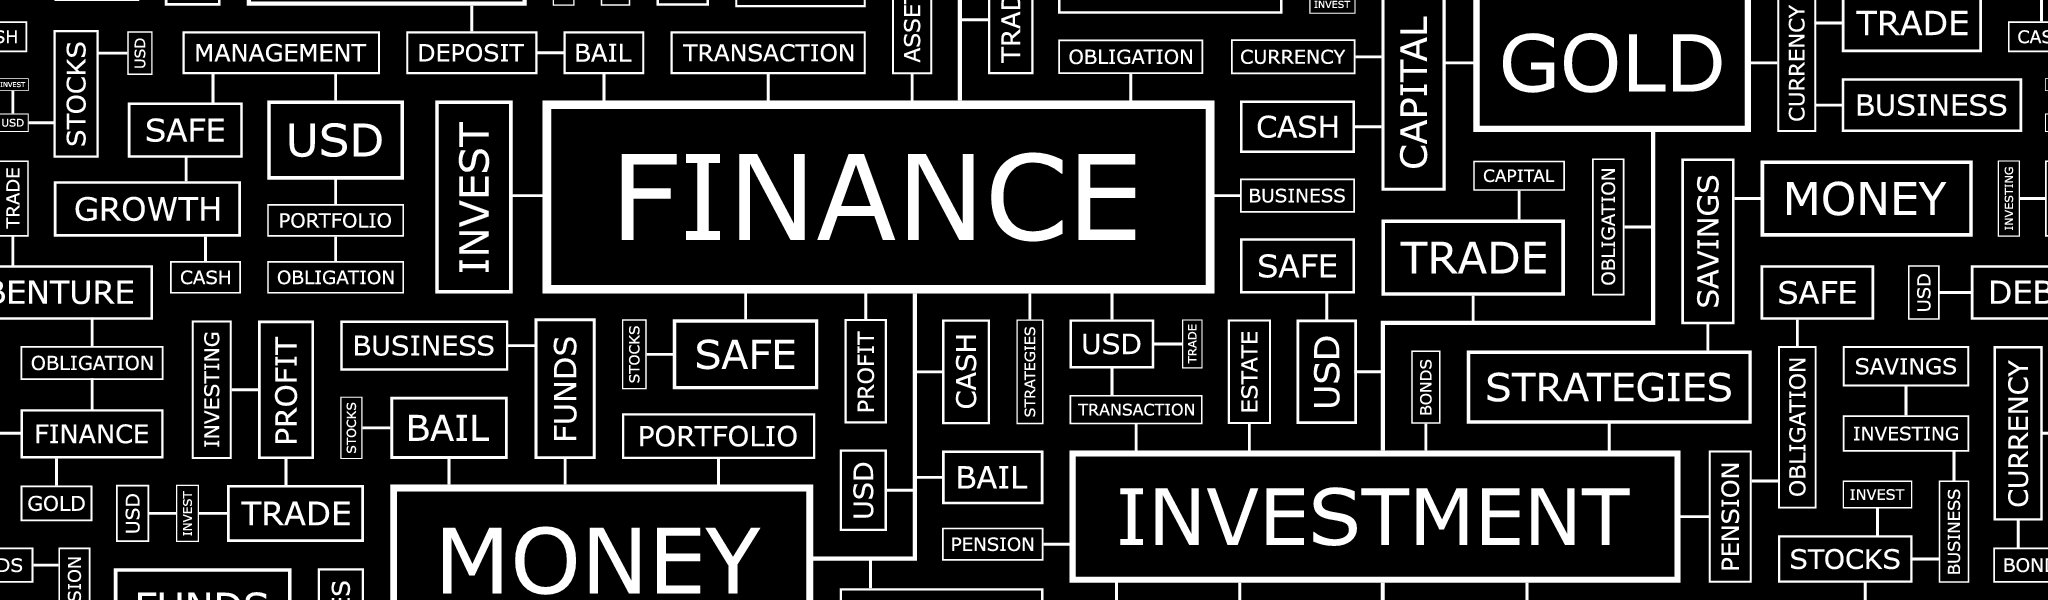 Areas of Finance